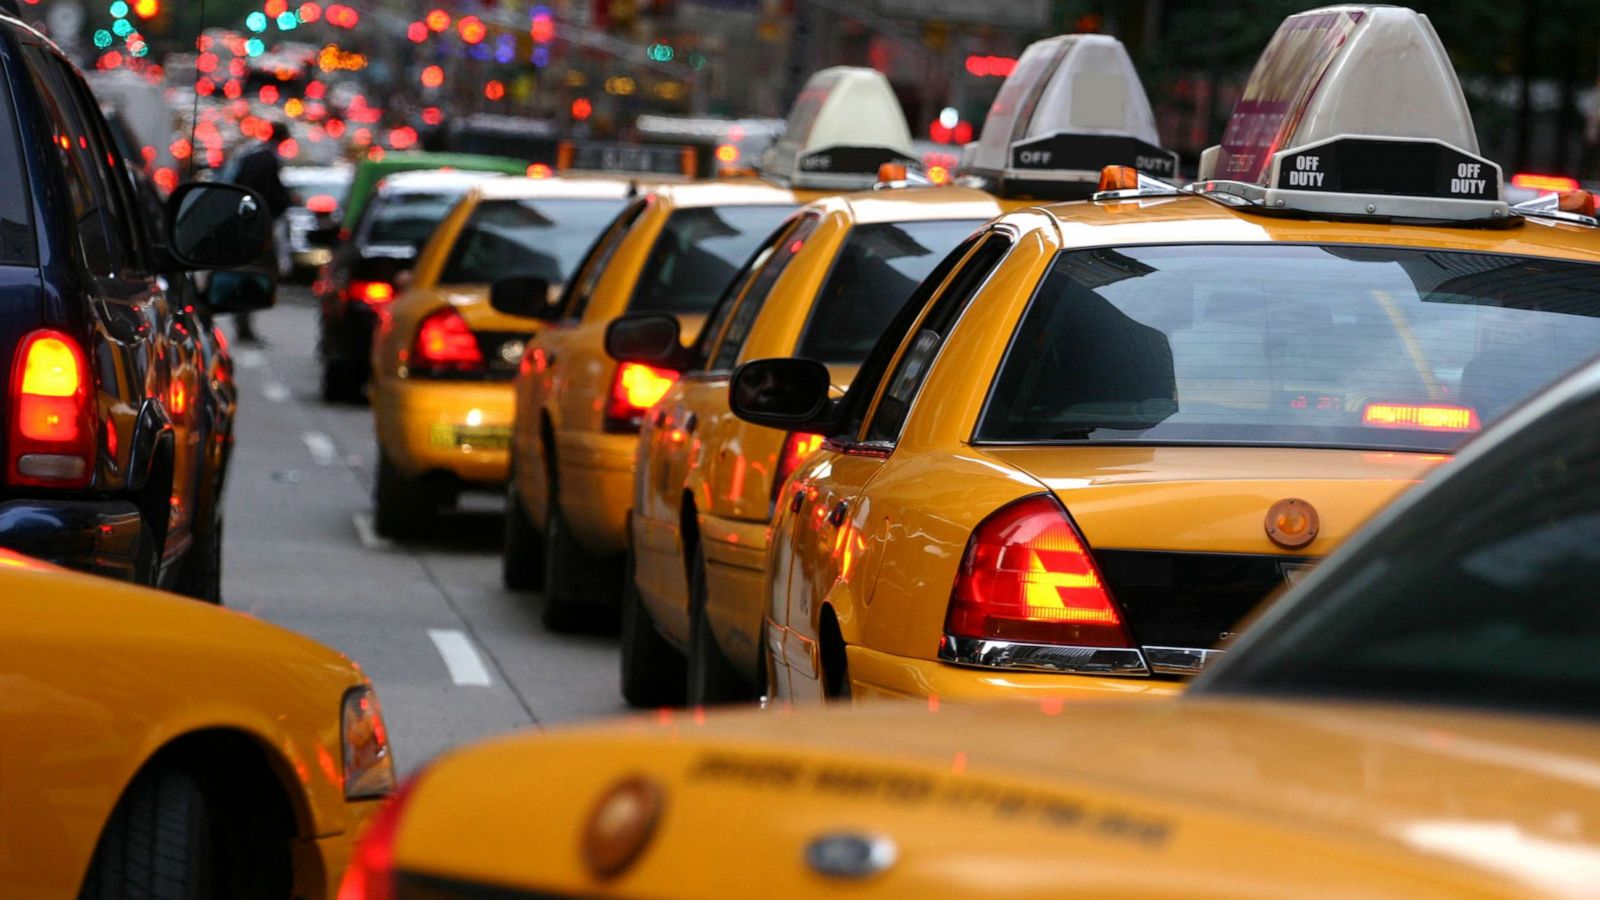 Struggling Nyc Cabs May Add Surge Pricing To Compete With Uber And Lyft Abc News